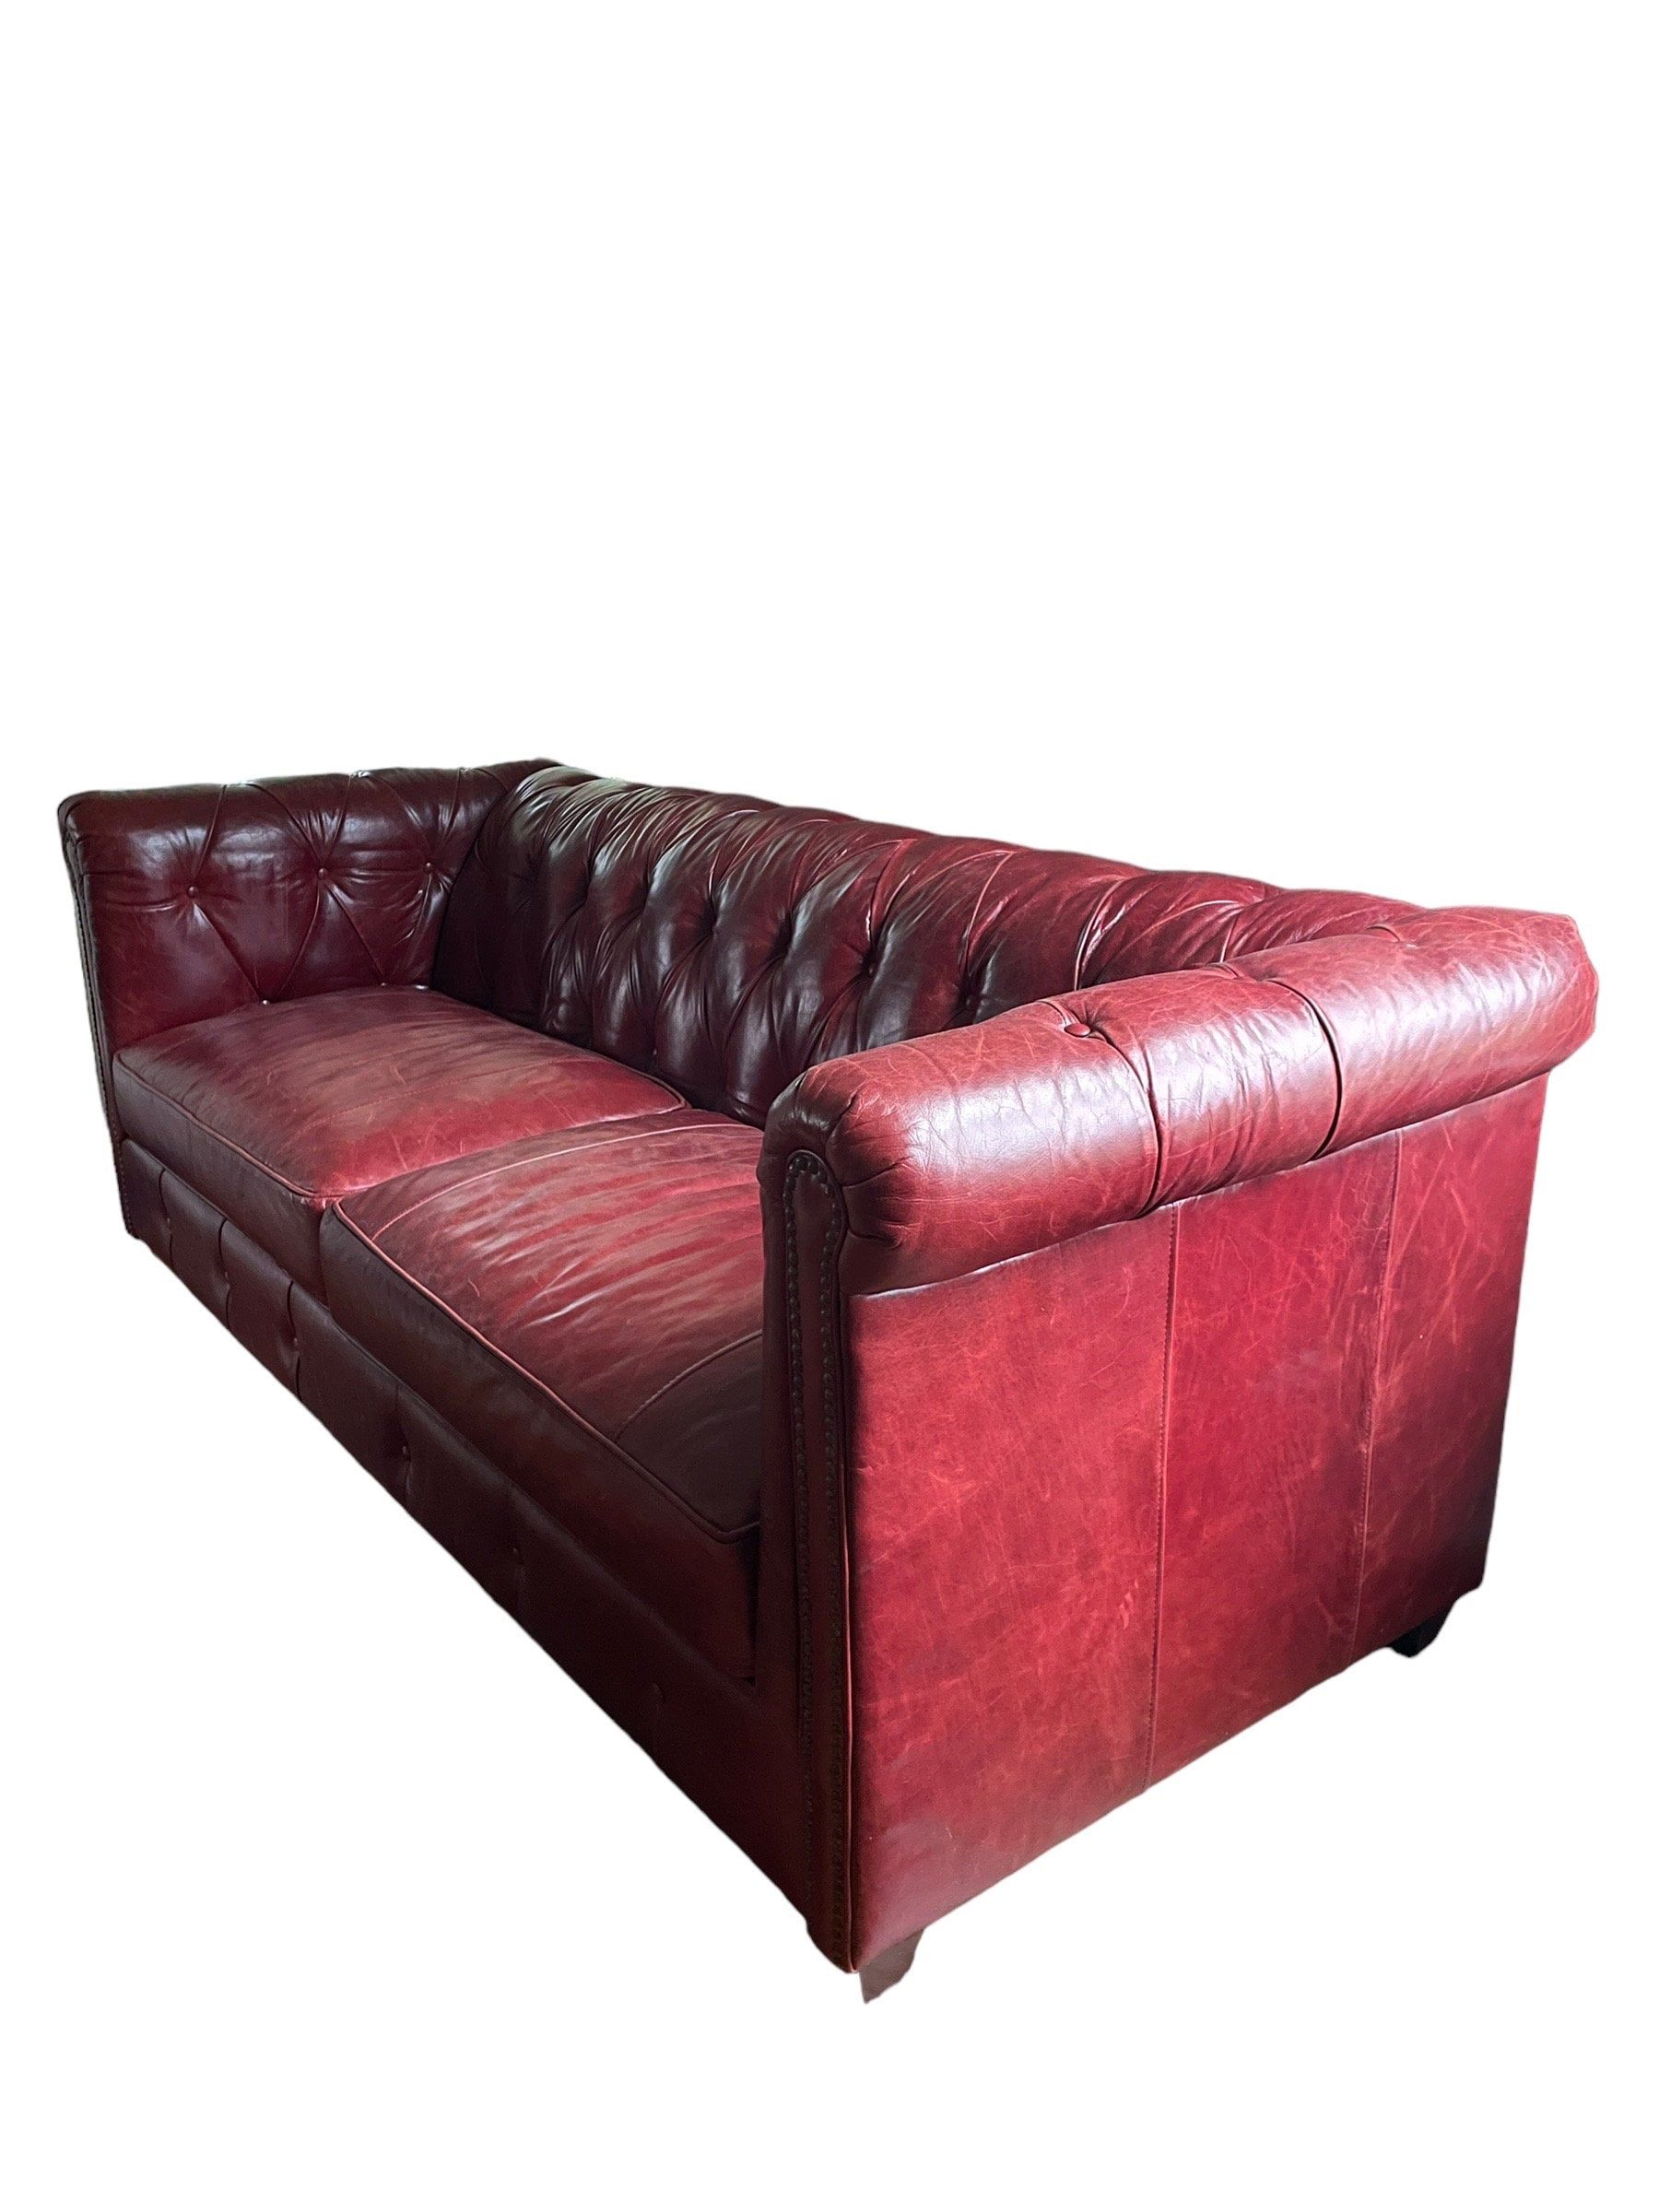 Red Hot: The Timeless Allure of Red Leather Couches